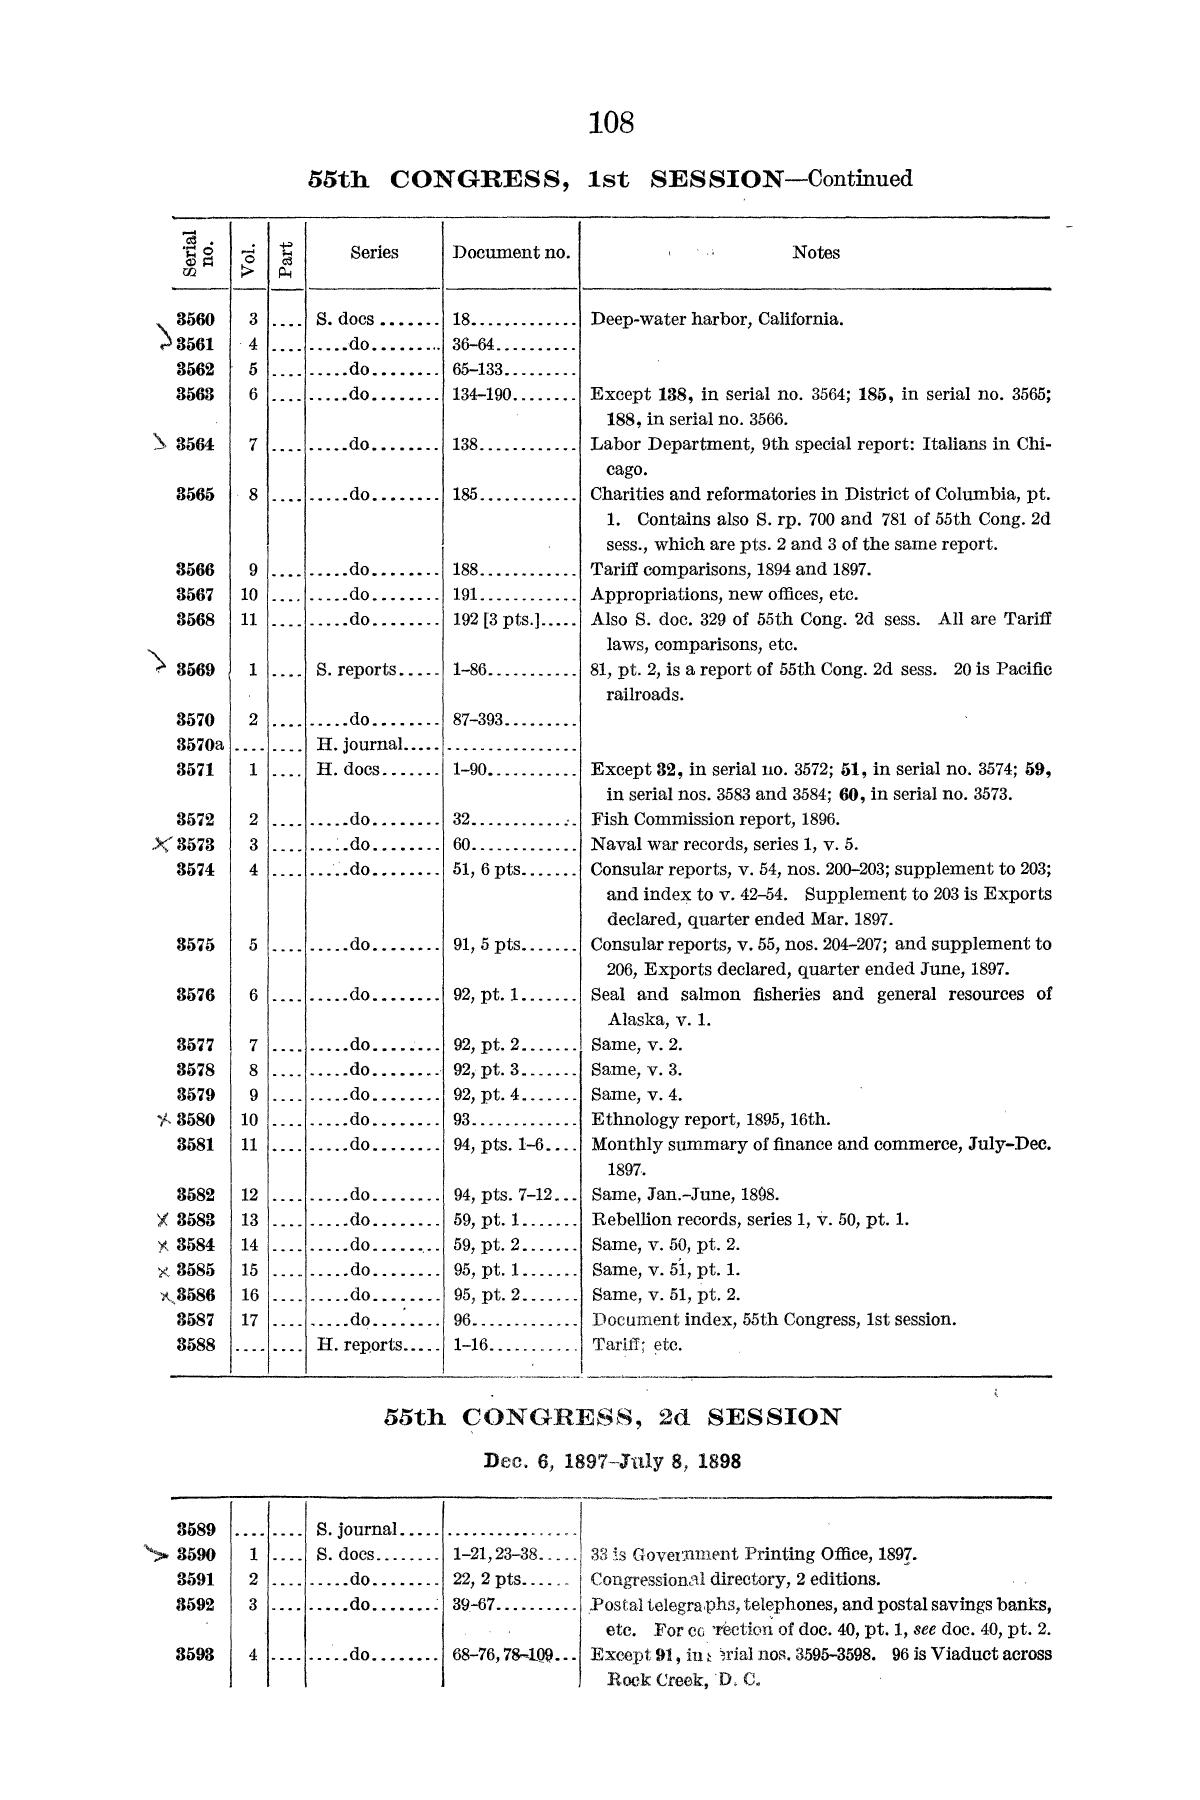 Checklist of United States Public Documents, 1789-1909, Third Edition Revised and Enlarged, Volume 1, Lists of Congressional and Departmental Publications
                                                
                                                    108
                                                